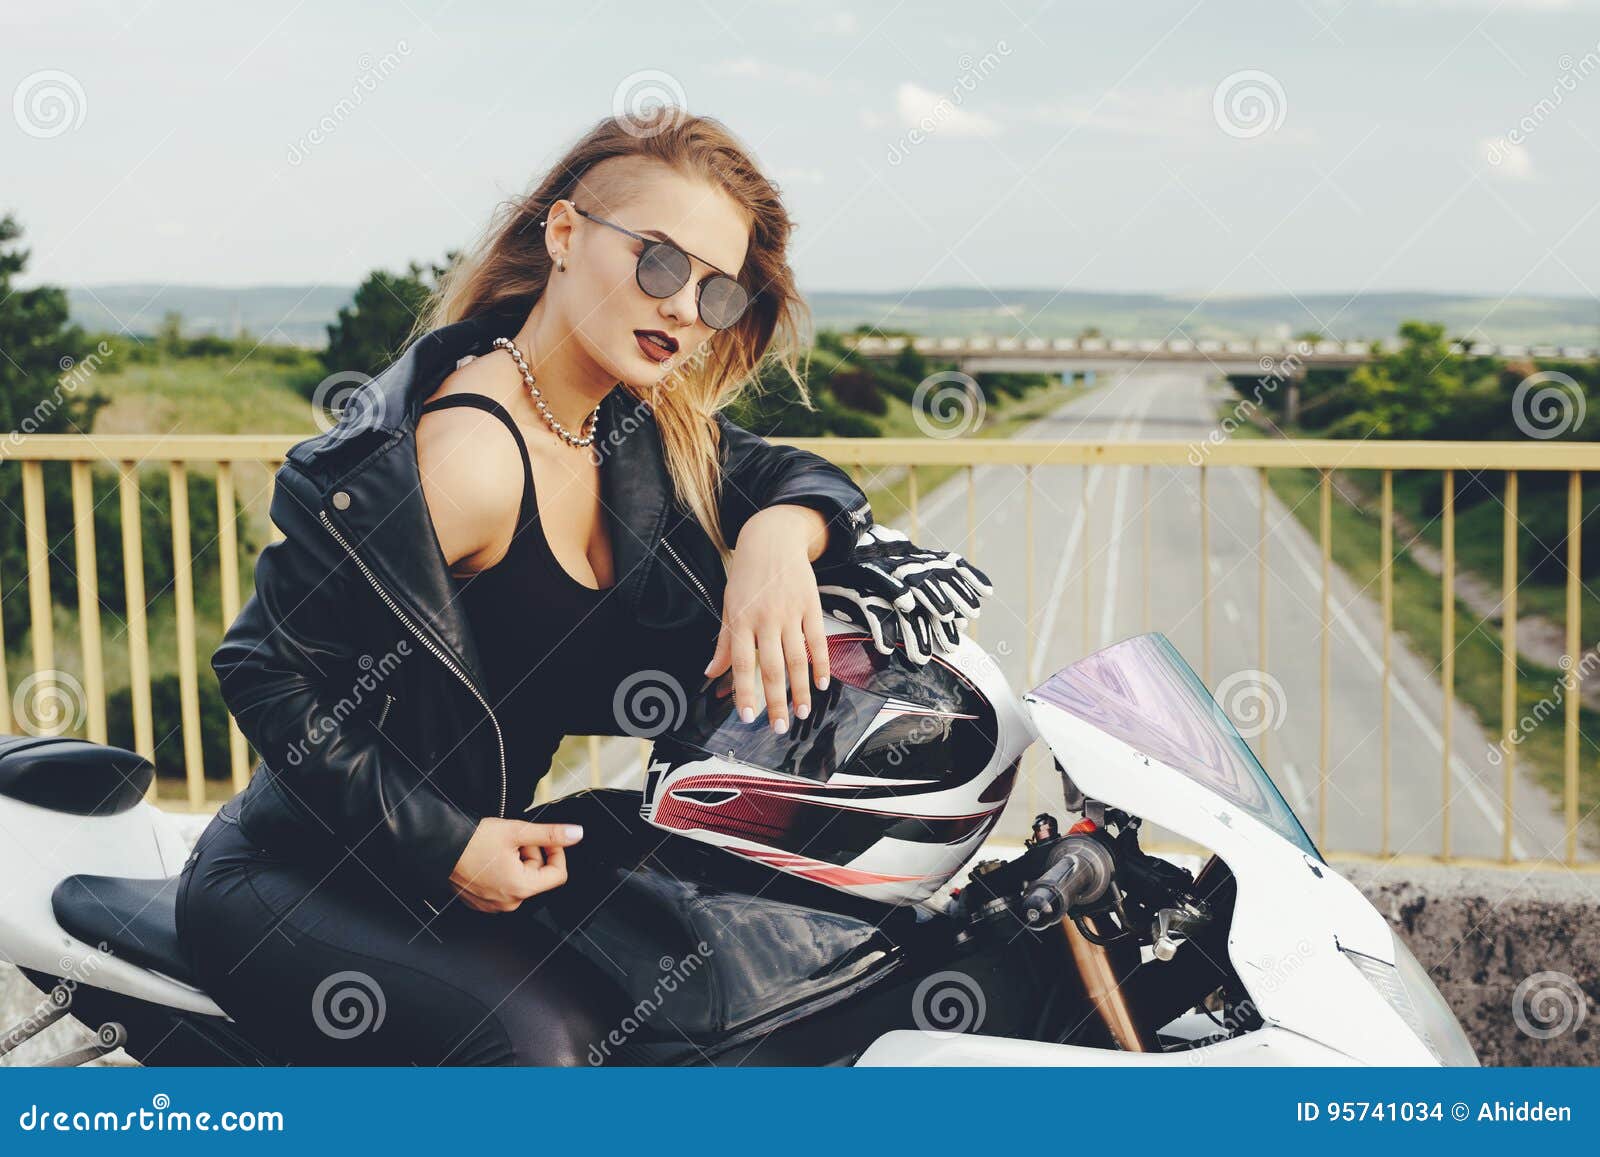 Biker Girl in a Leather Clothes on a Motorcycle Stock Photo - Image of ...